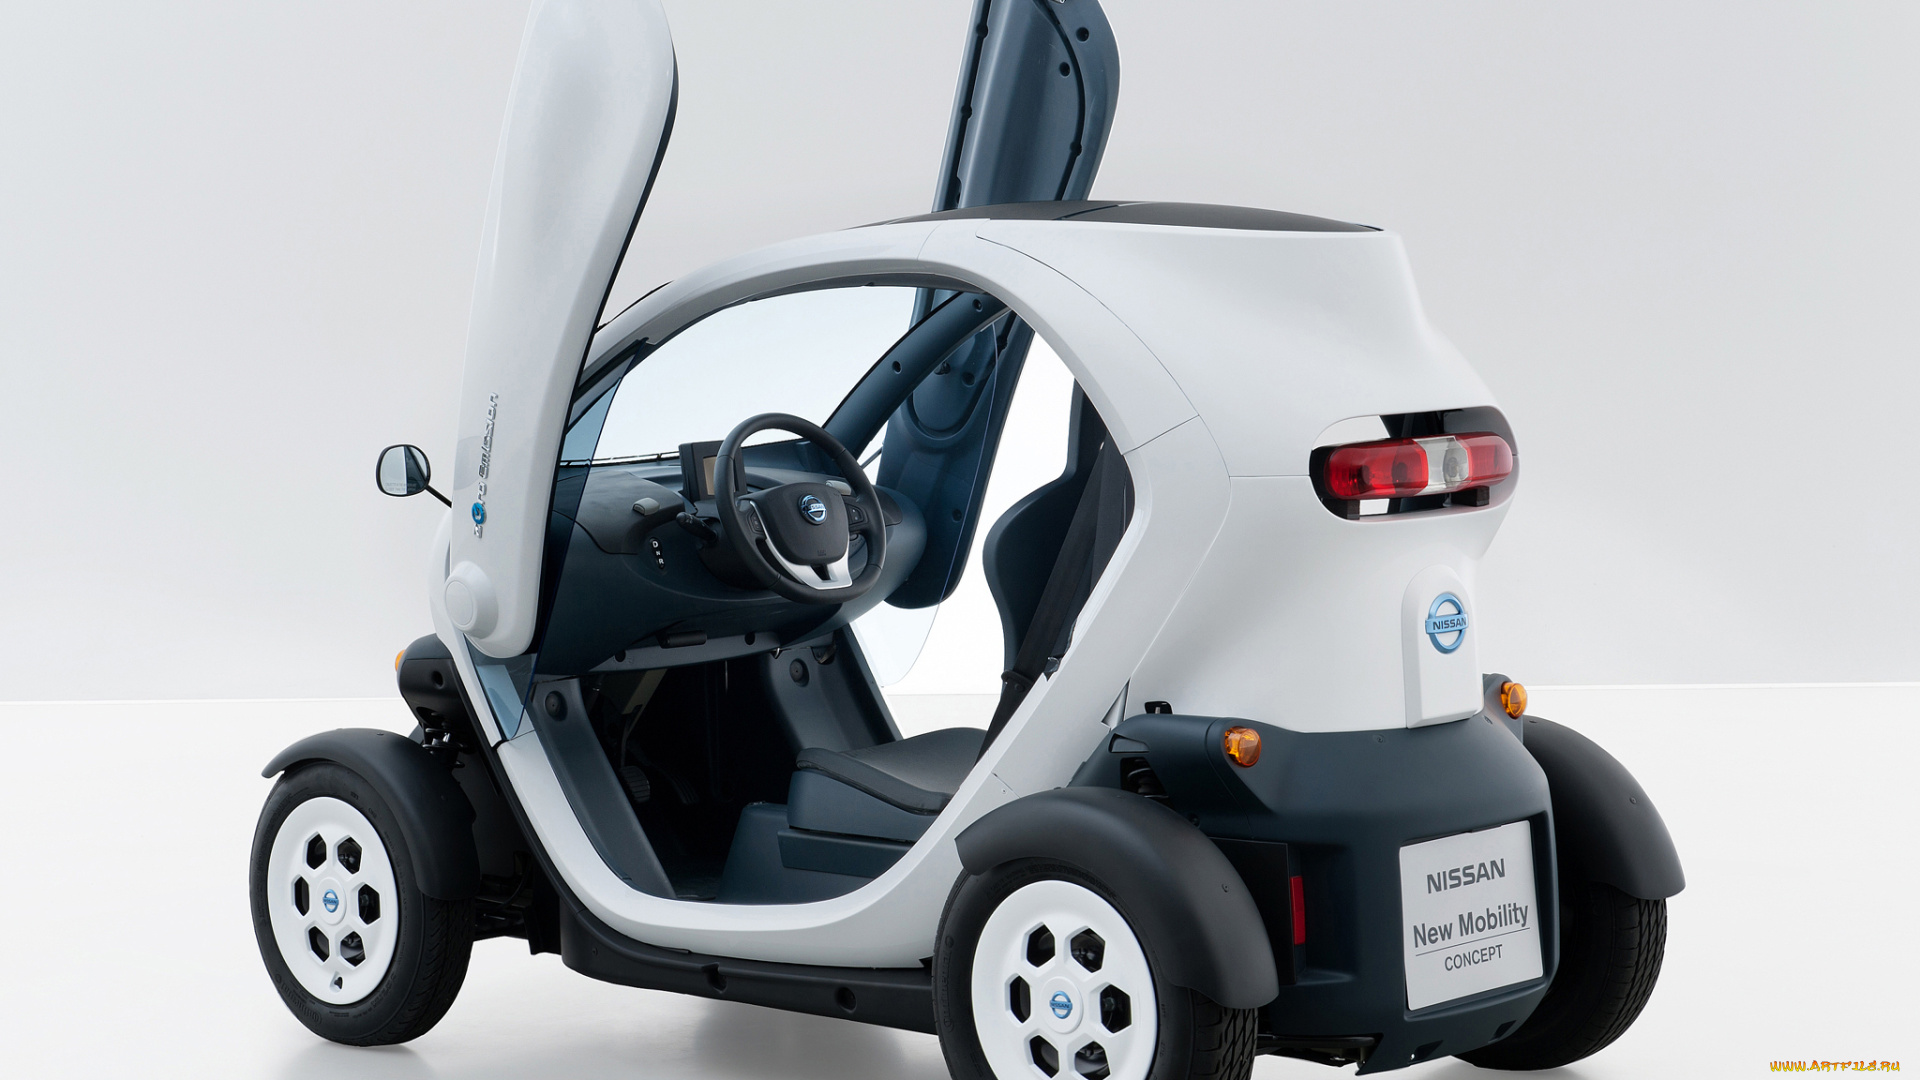 nissan, new, mobility, concept, 2011, автомобили, nissan, datsun, new, mobility, concept, 2011